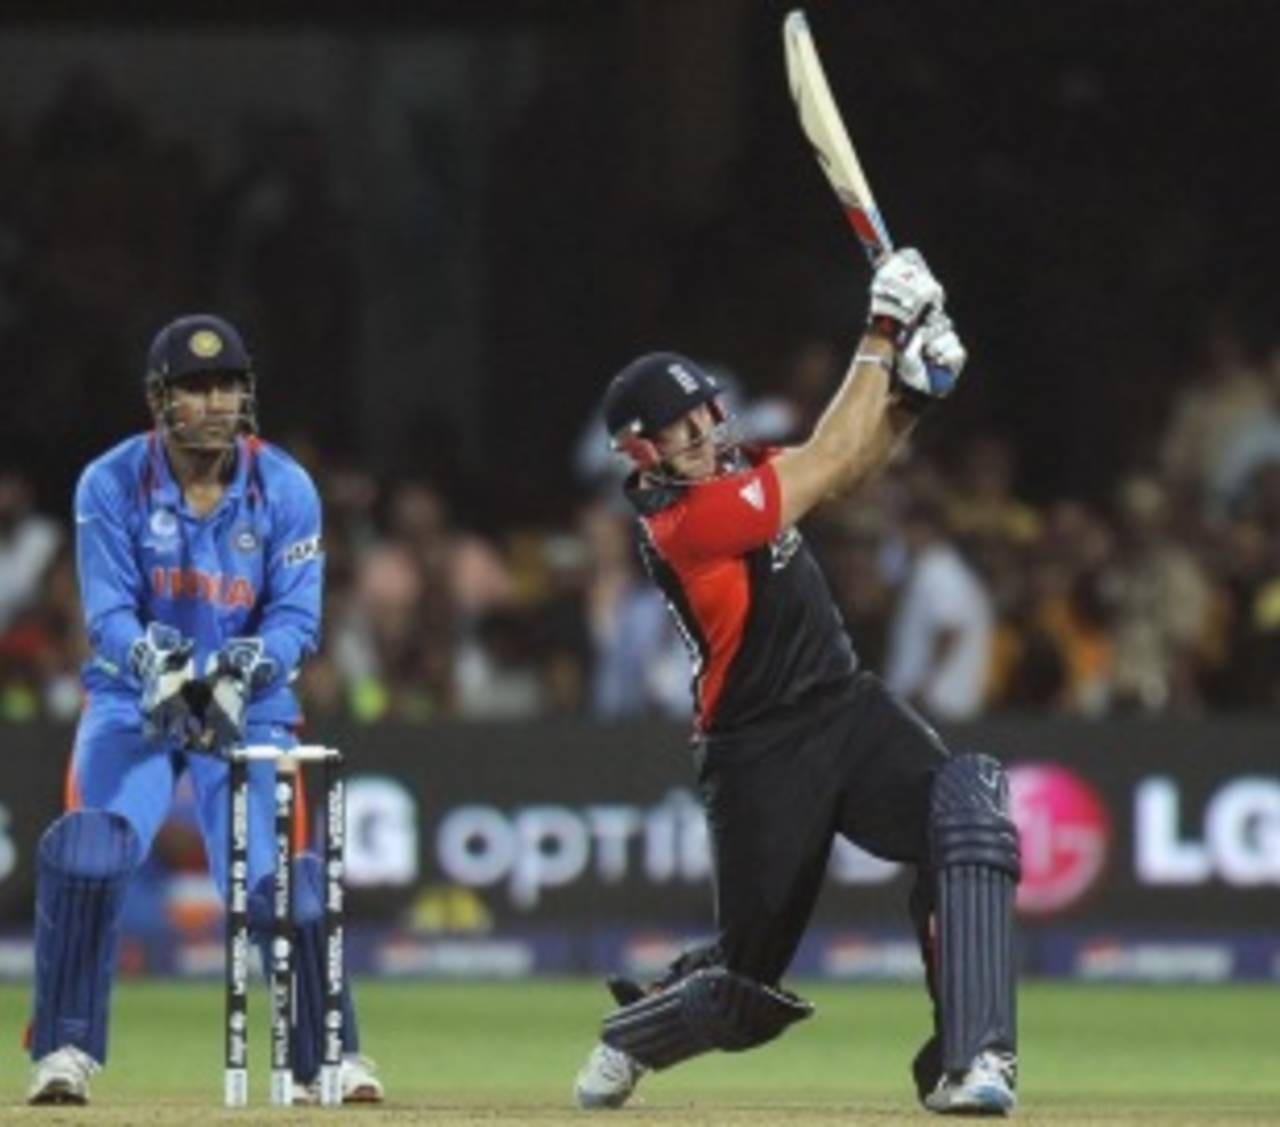 Tim Bresnan clobbered a huge six over midwicket, India v England, World Cup, Group B, Bangalore, February 27, 2011